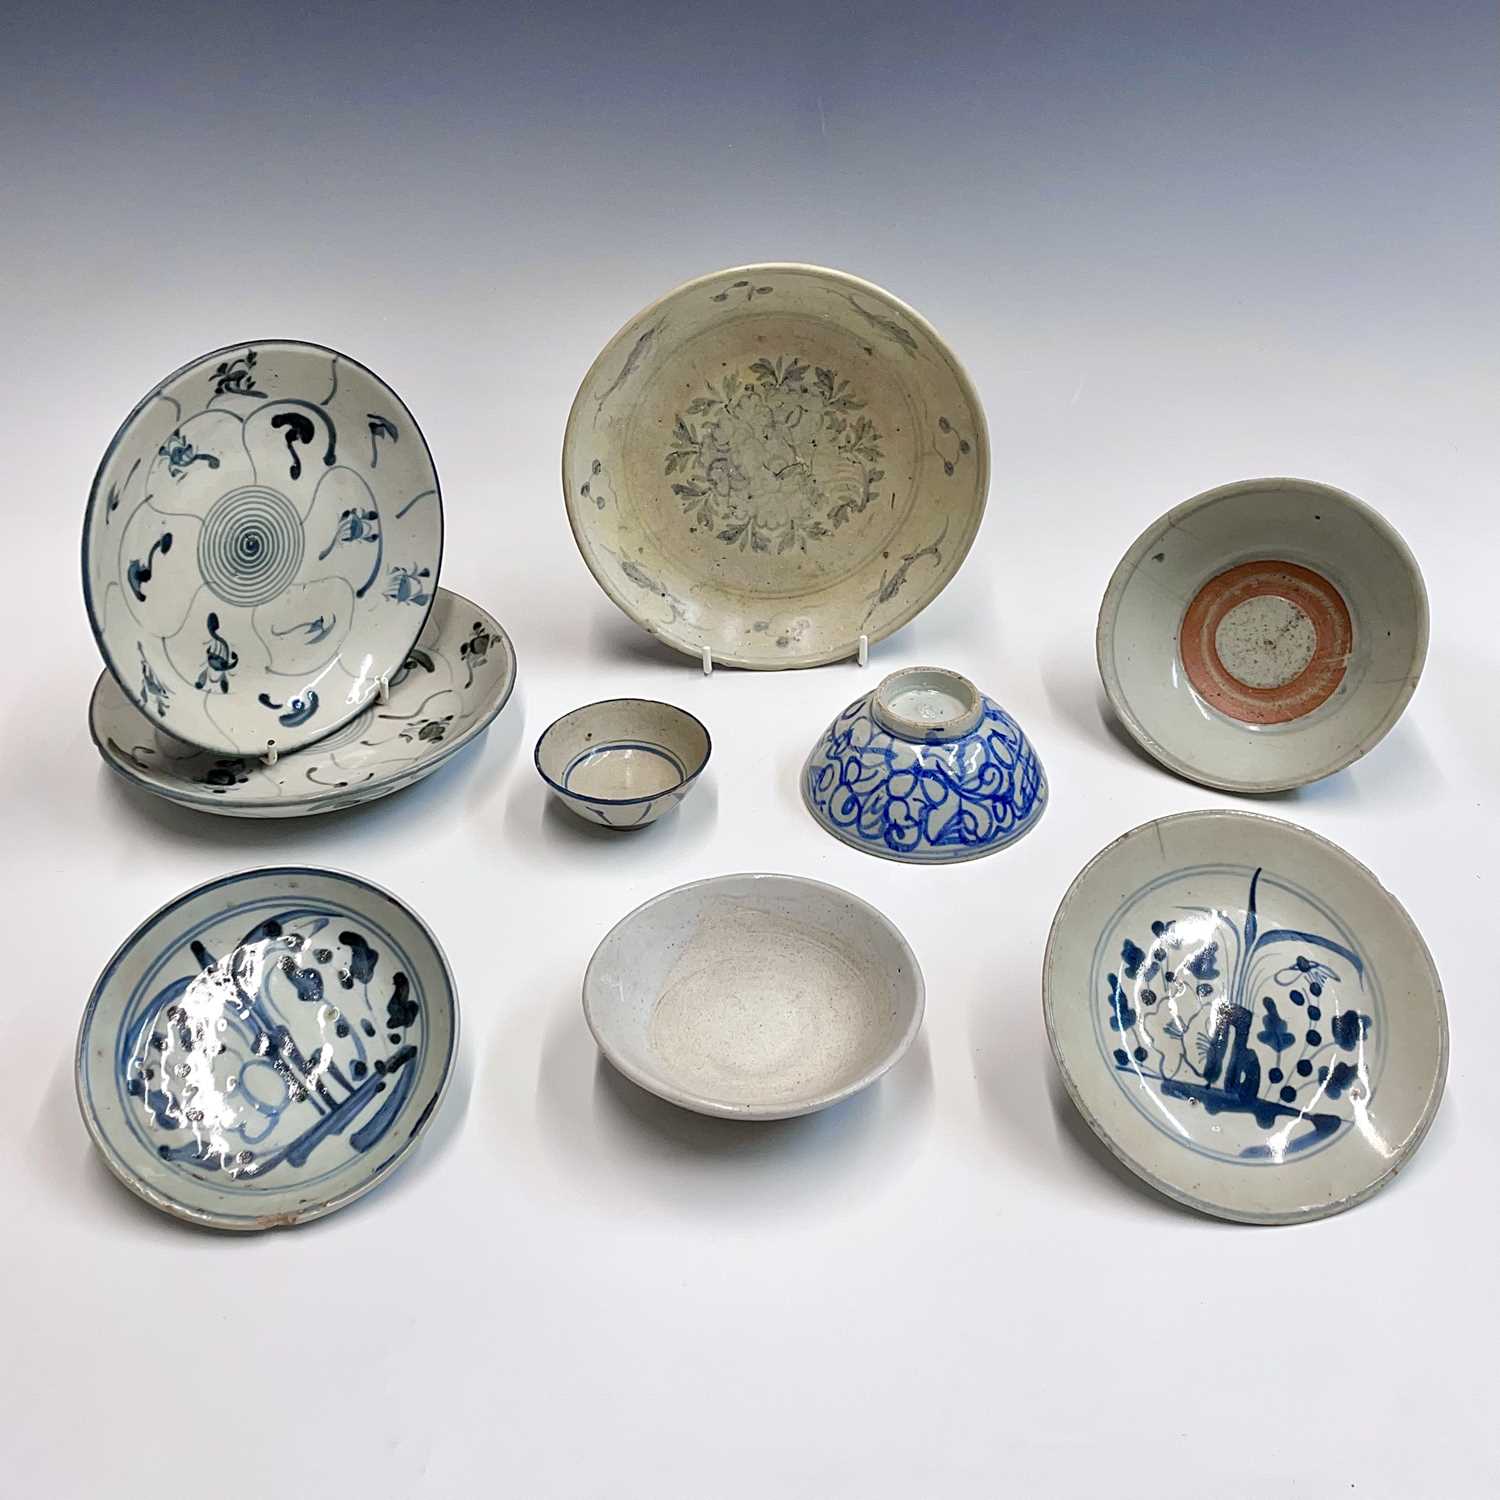 A selection of Chinese provincial pottery bowls and plates, Ming Dynasty, largest dish diameter 19.